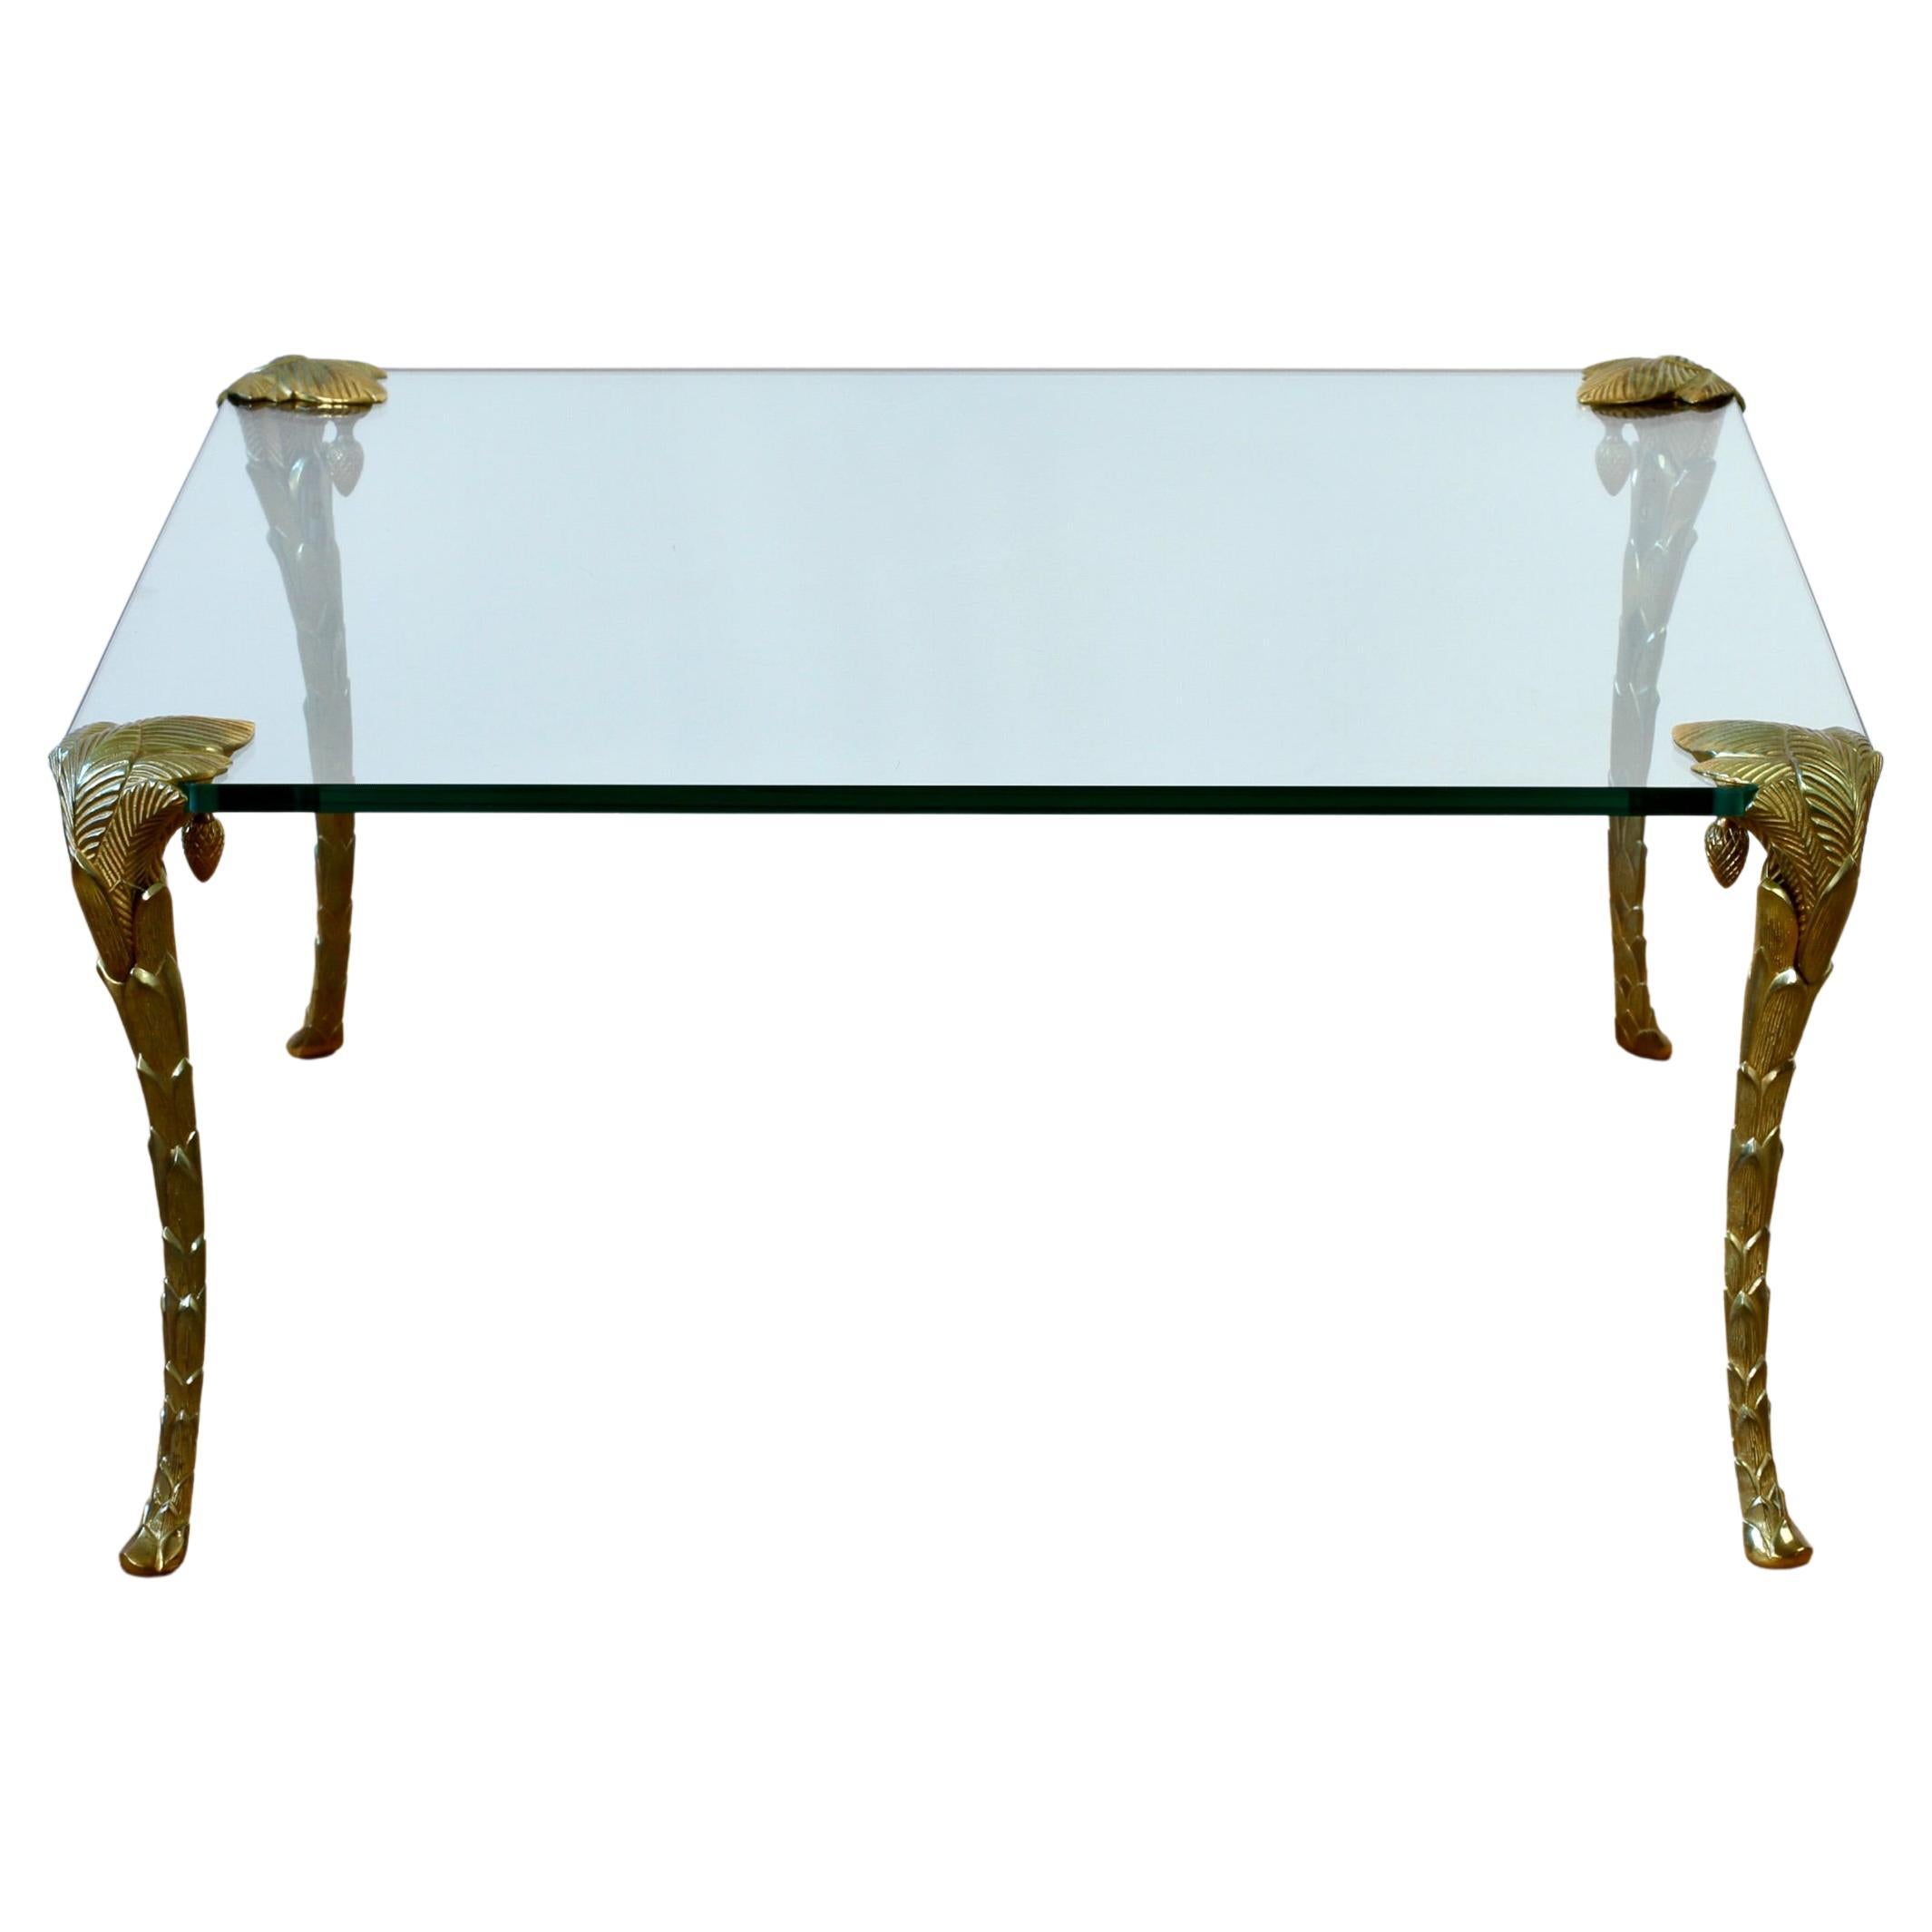 Maison Charles Extremely Rare Gold Plated Bronze Palm Leaf Coffee Center Table For Sale